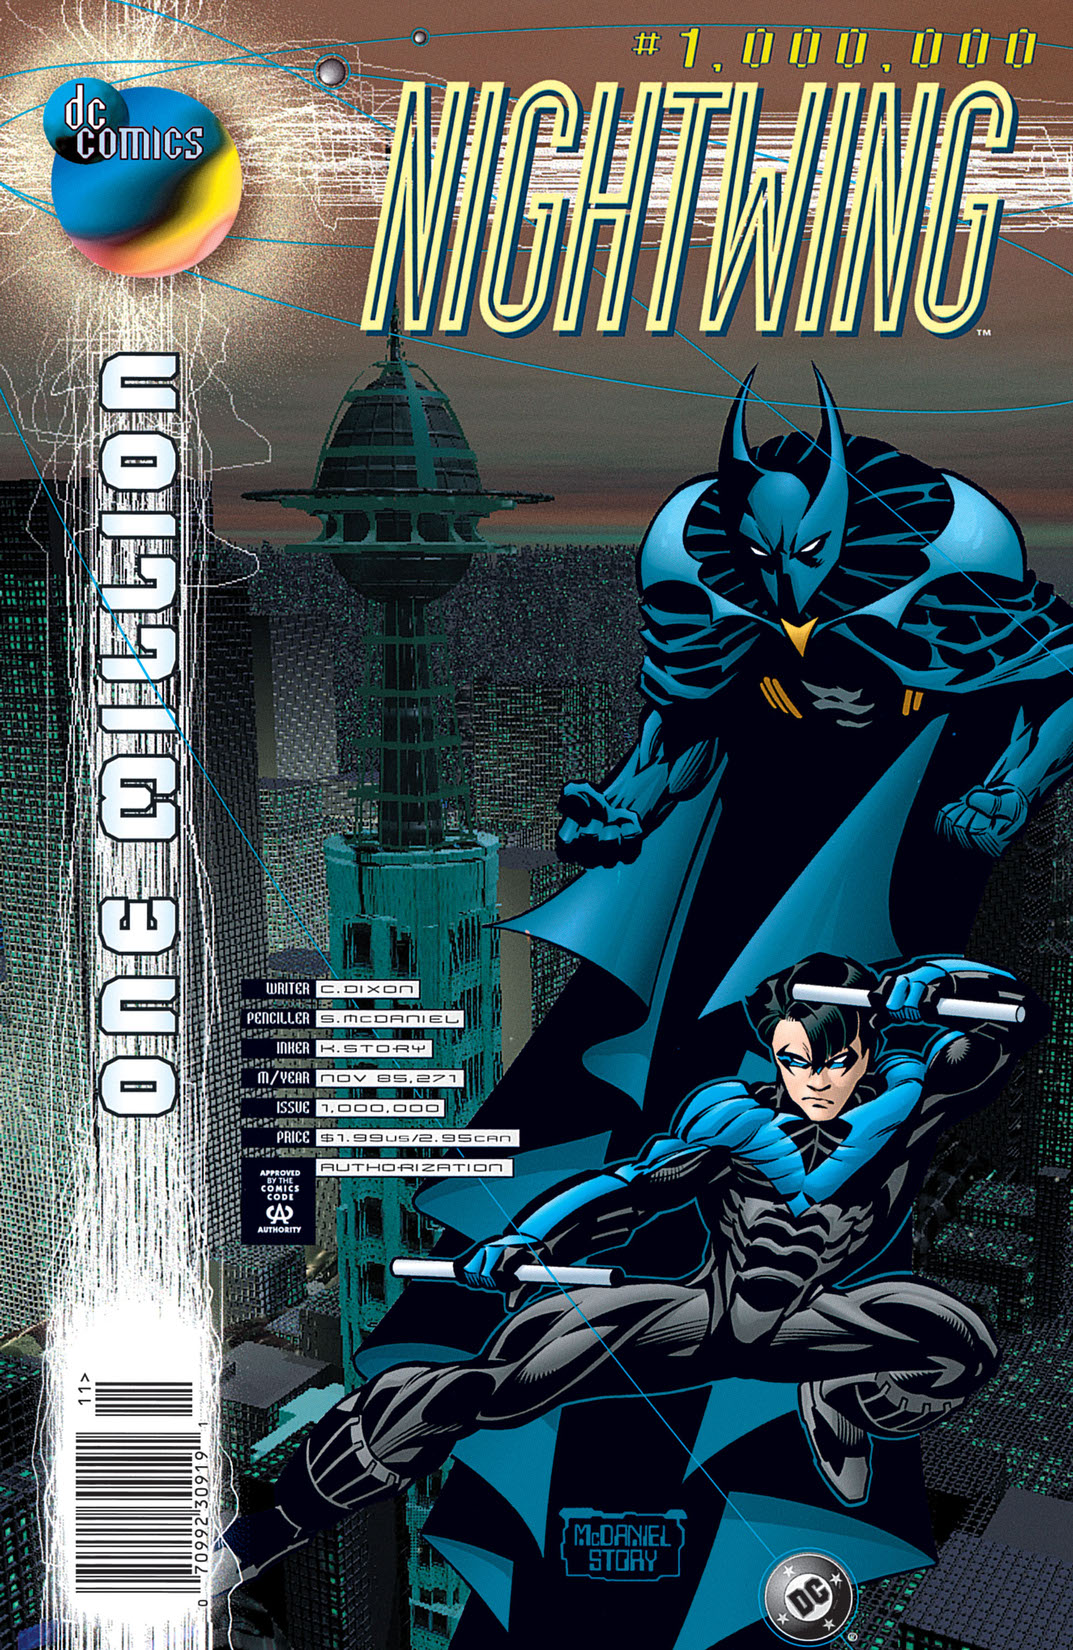 Nightwing #1000000 preview images